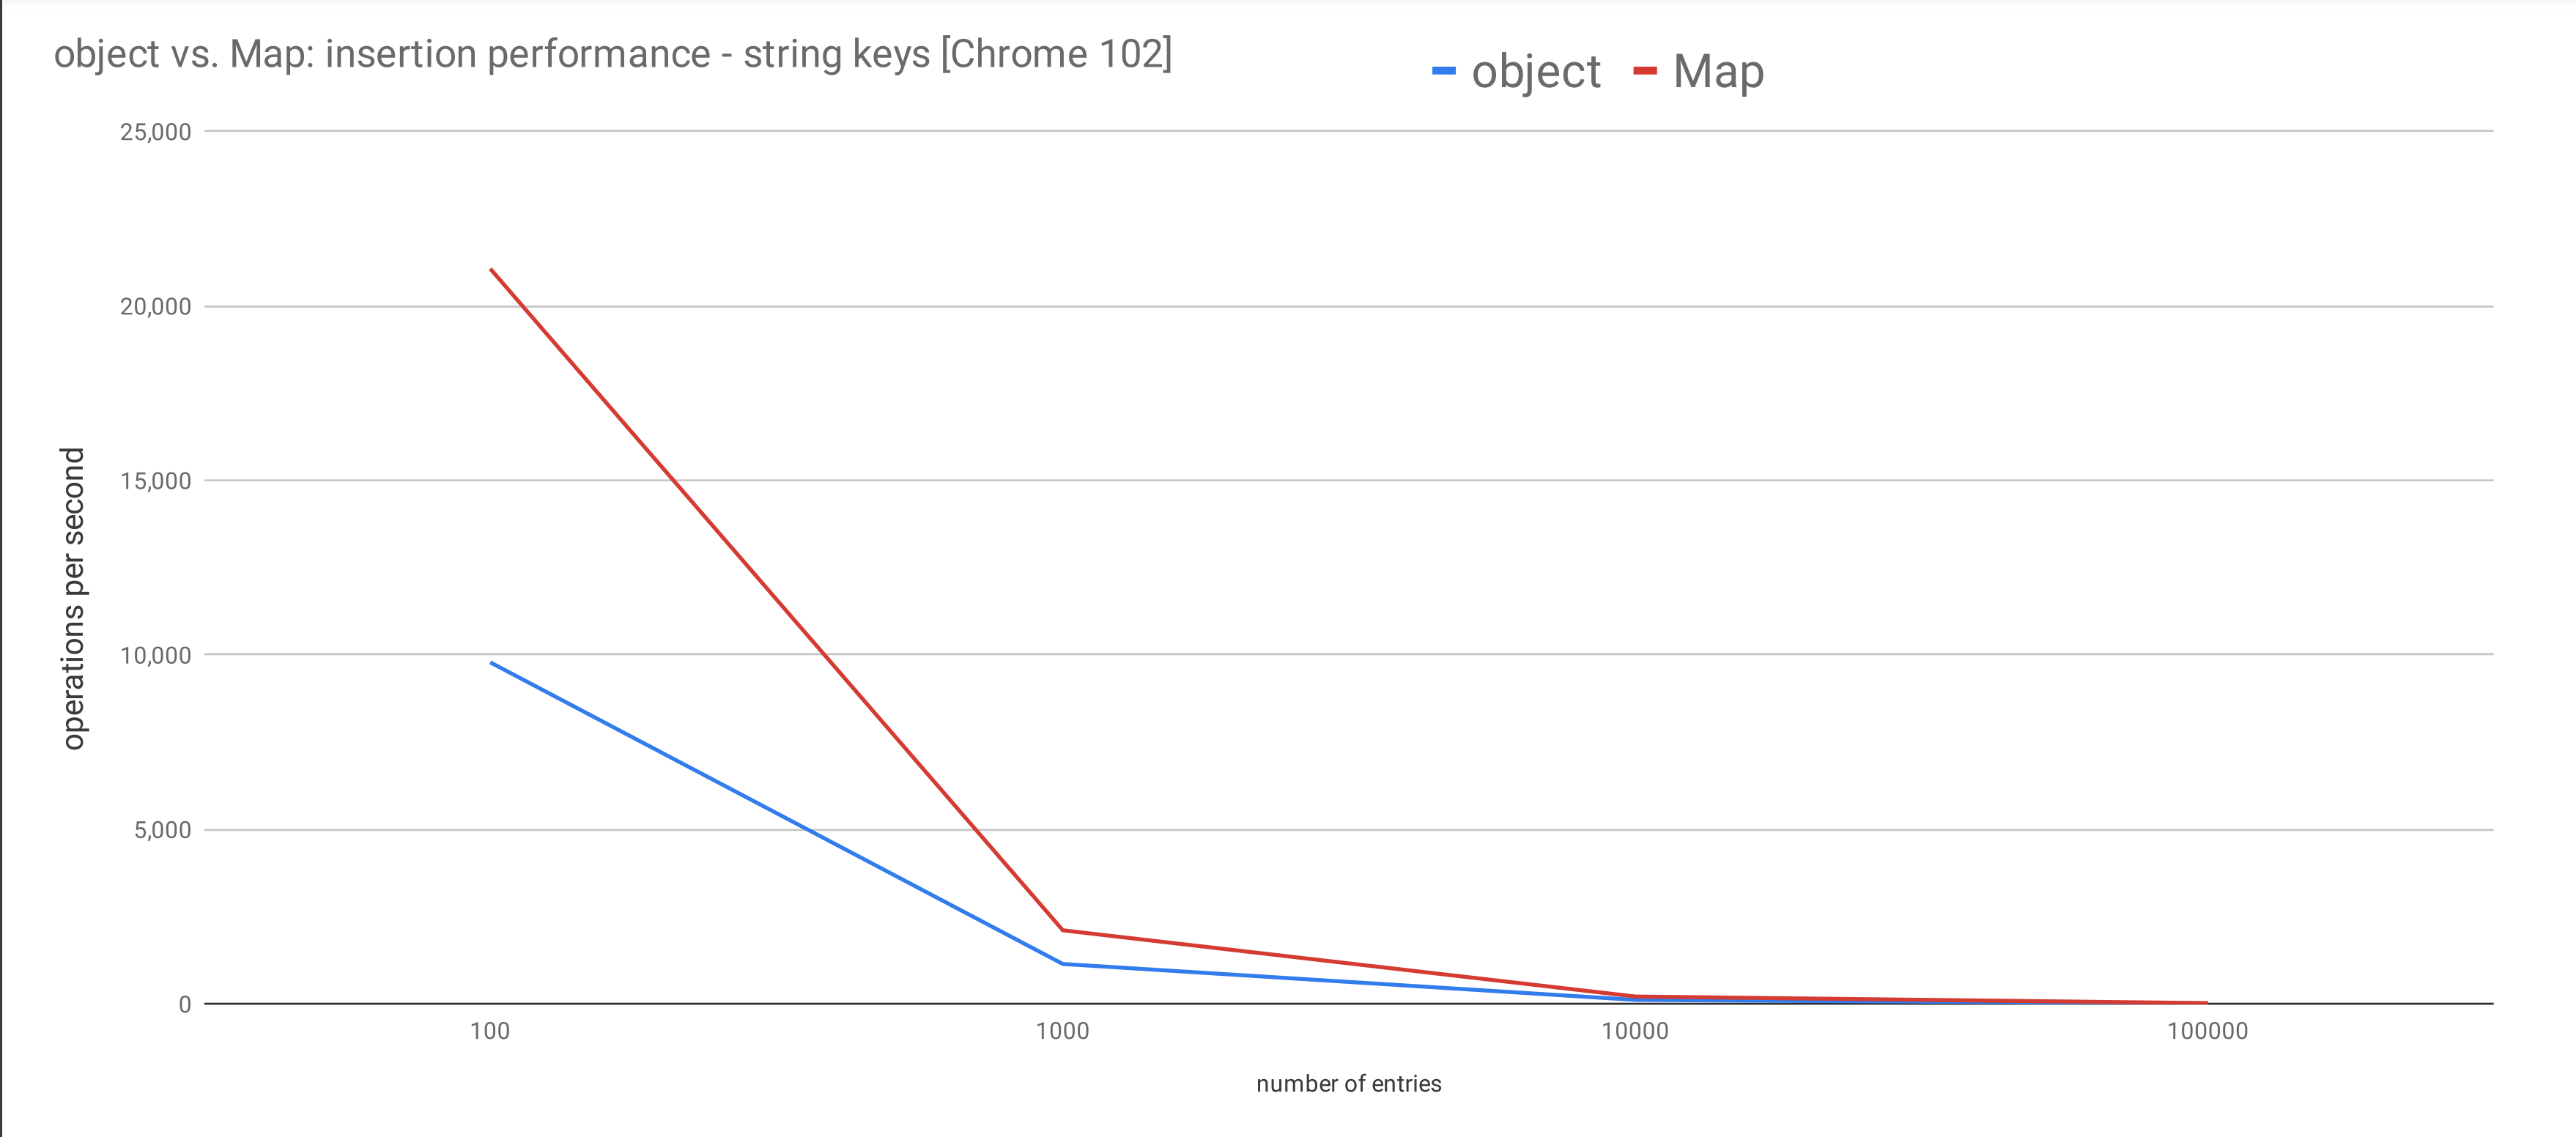 Object vs Map insertion performance with string keys